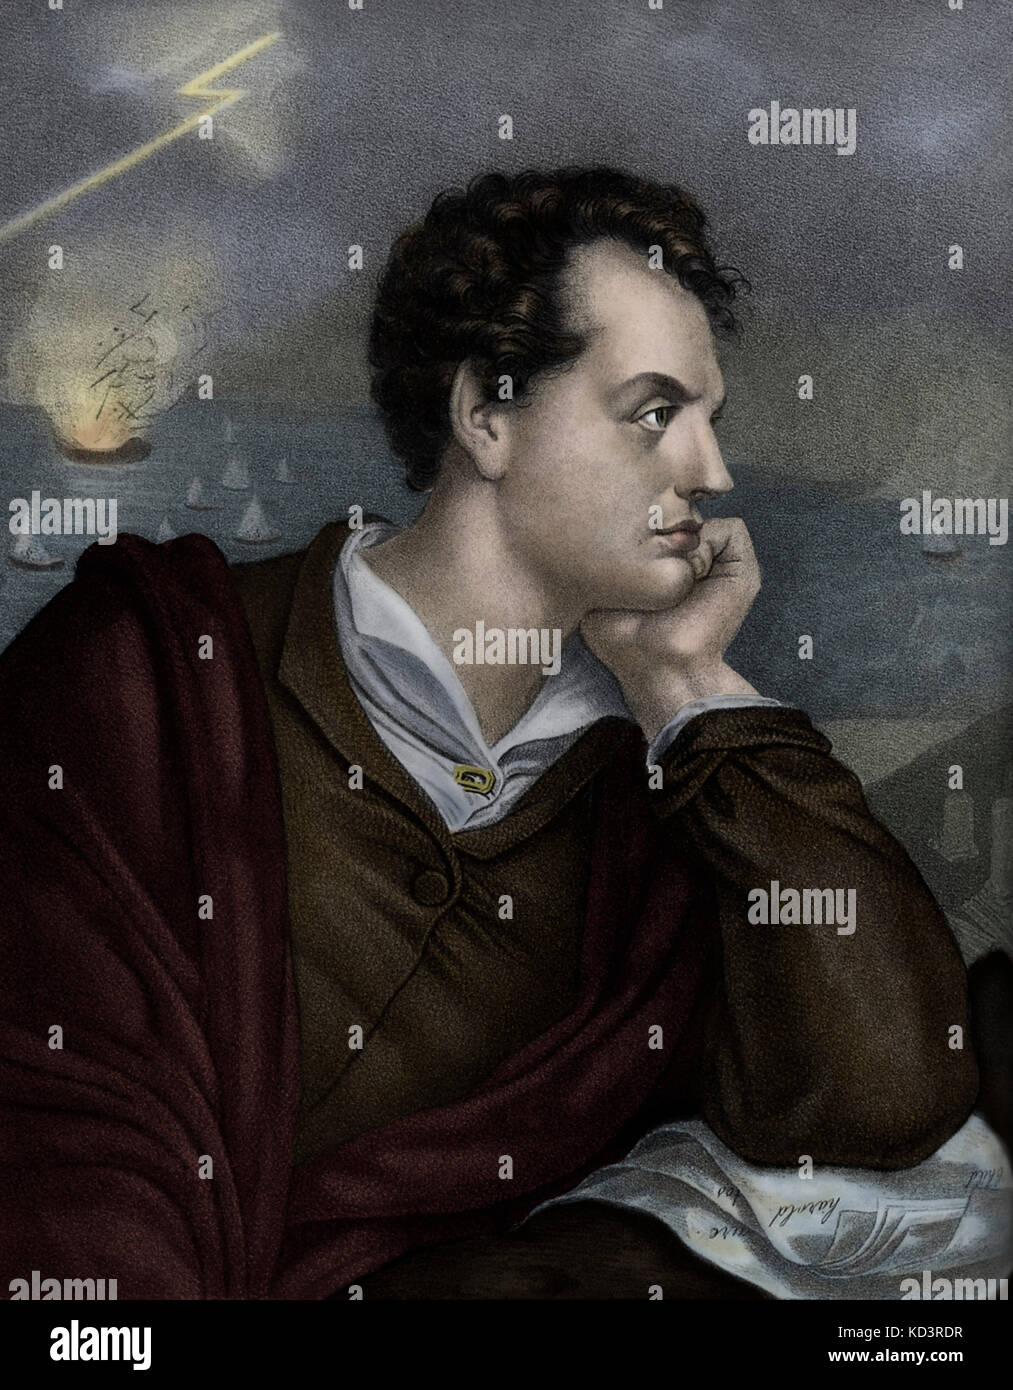 George Gordon Byron, 6th Baron Byron. Portrait of the British poet known as Lord Byron. 22 January 1788 – 19 April 1824 Stock Photo